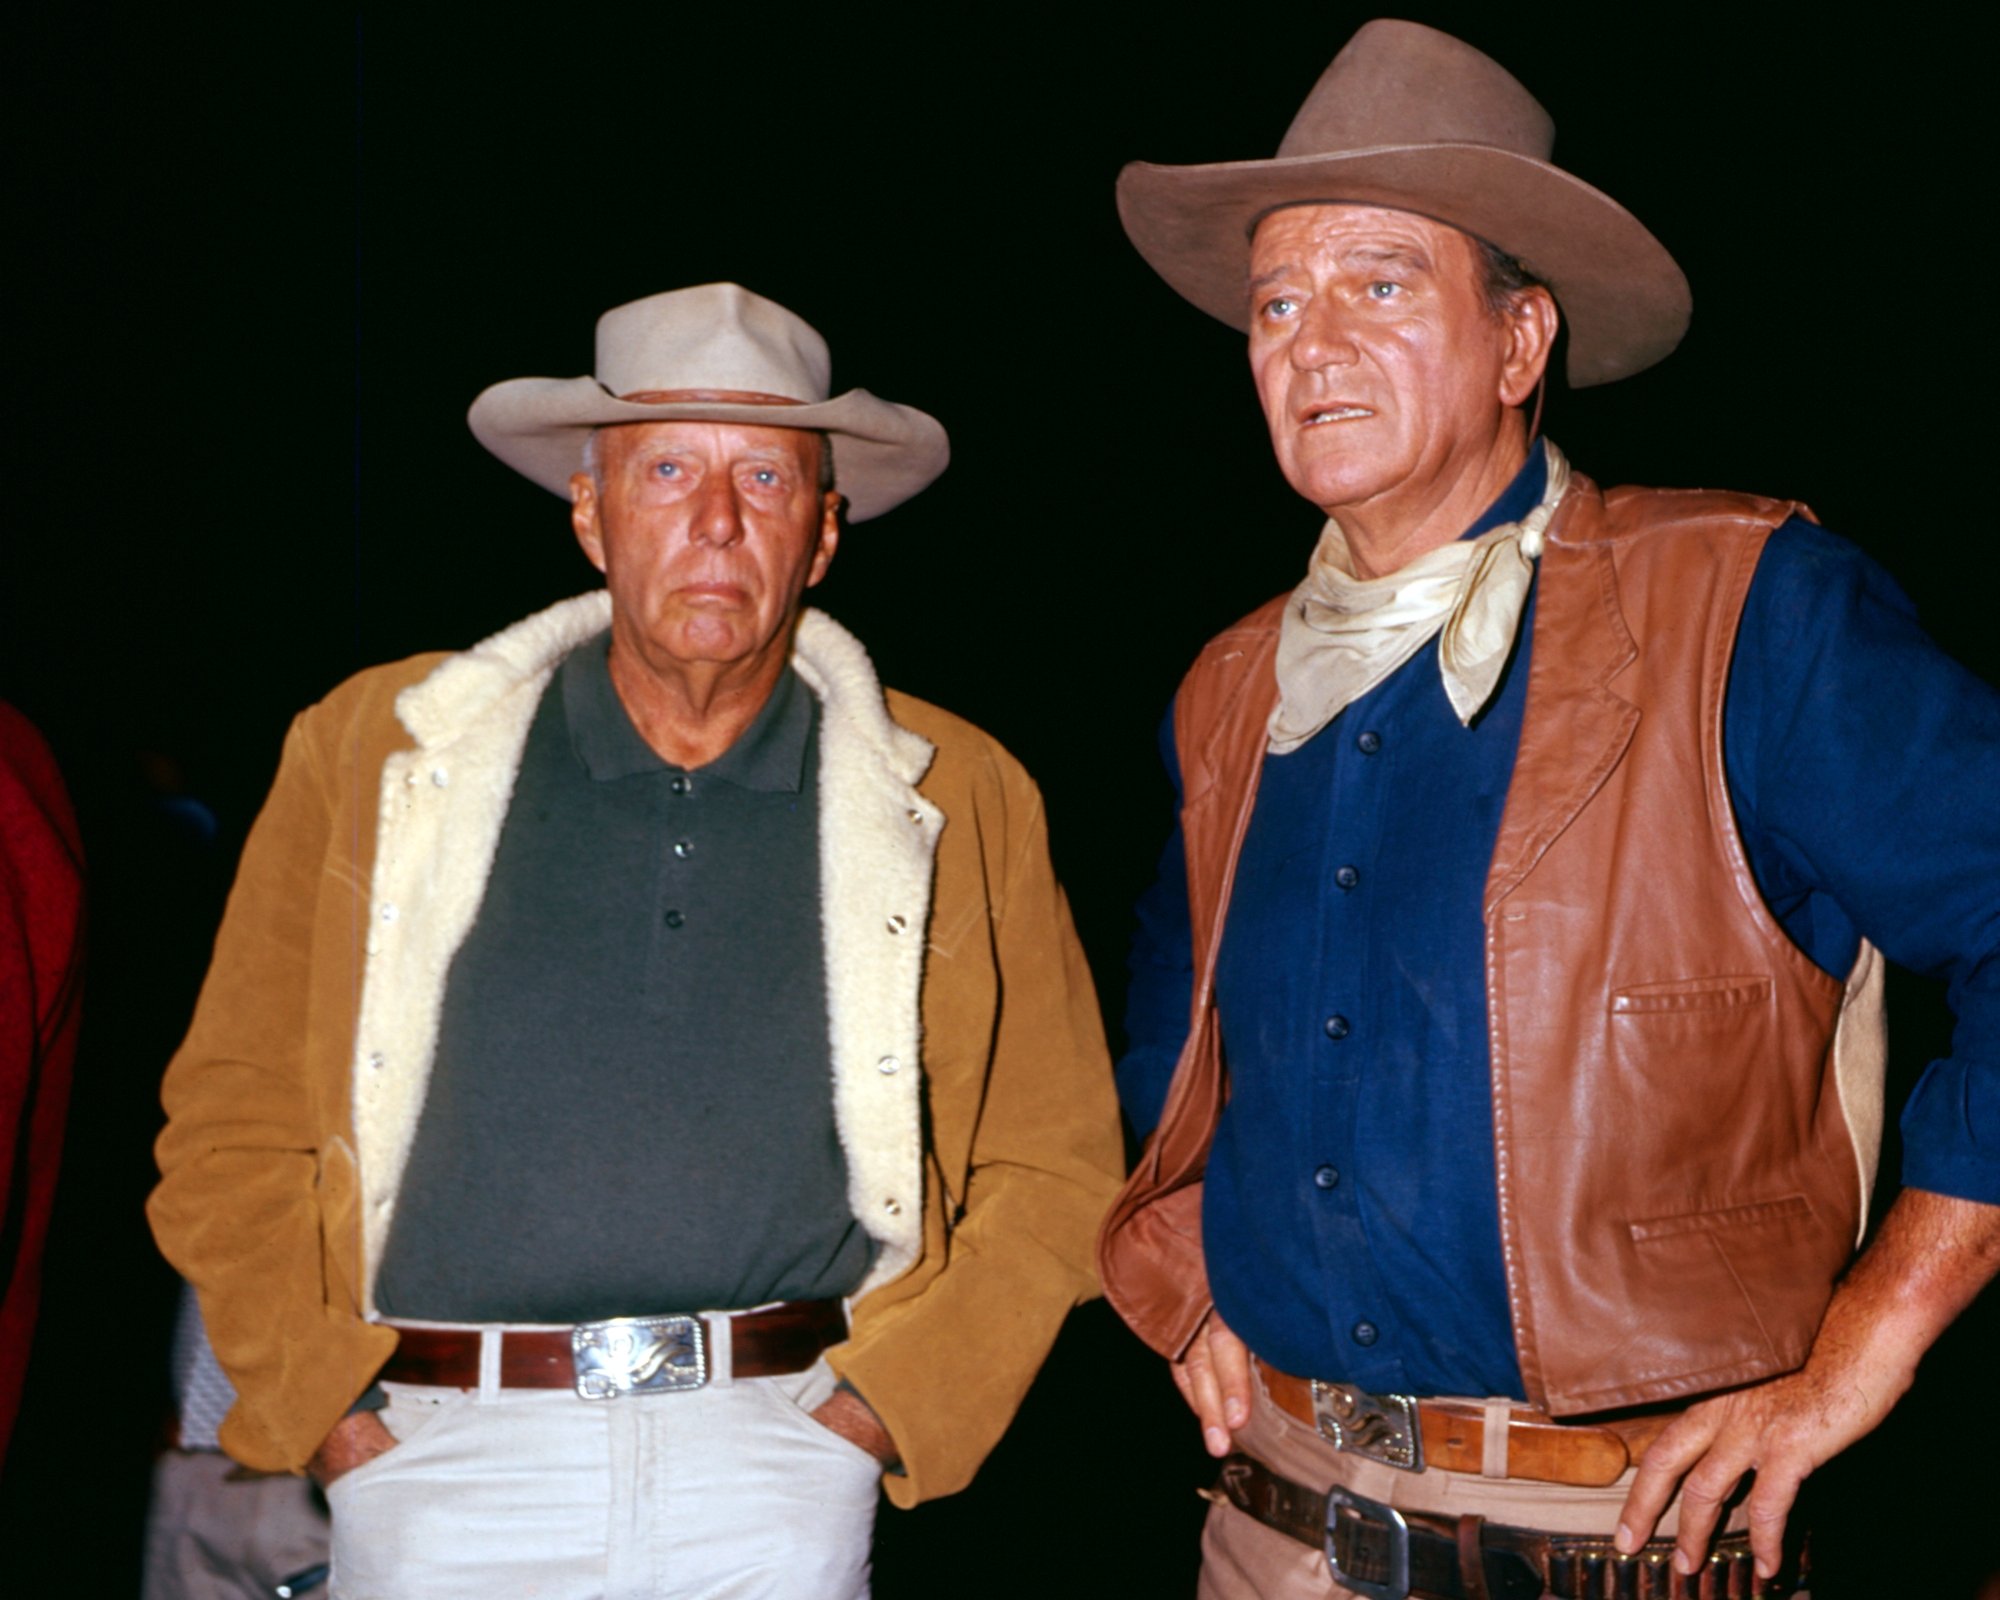 Howard Hawks and John Wayne wearing Western outfits, looking surprised in front of a dark background